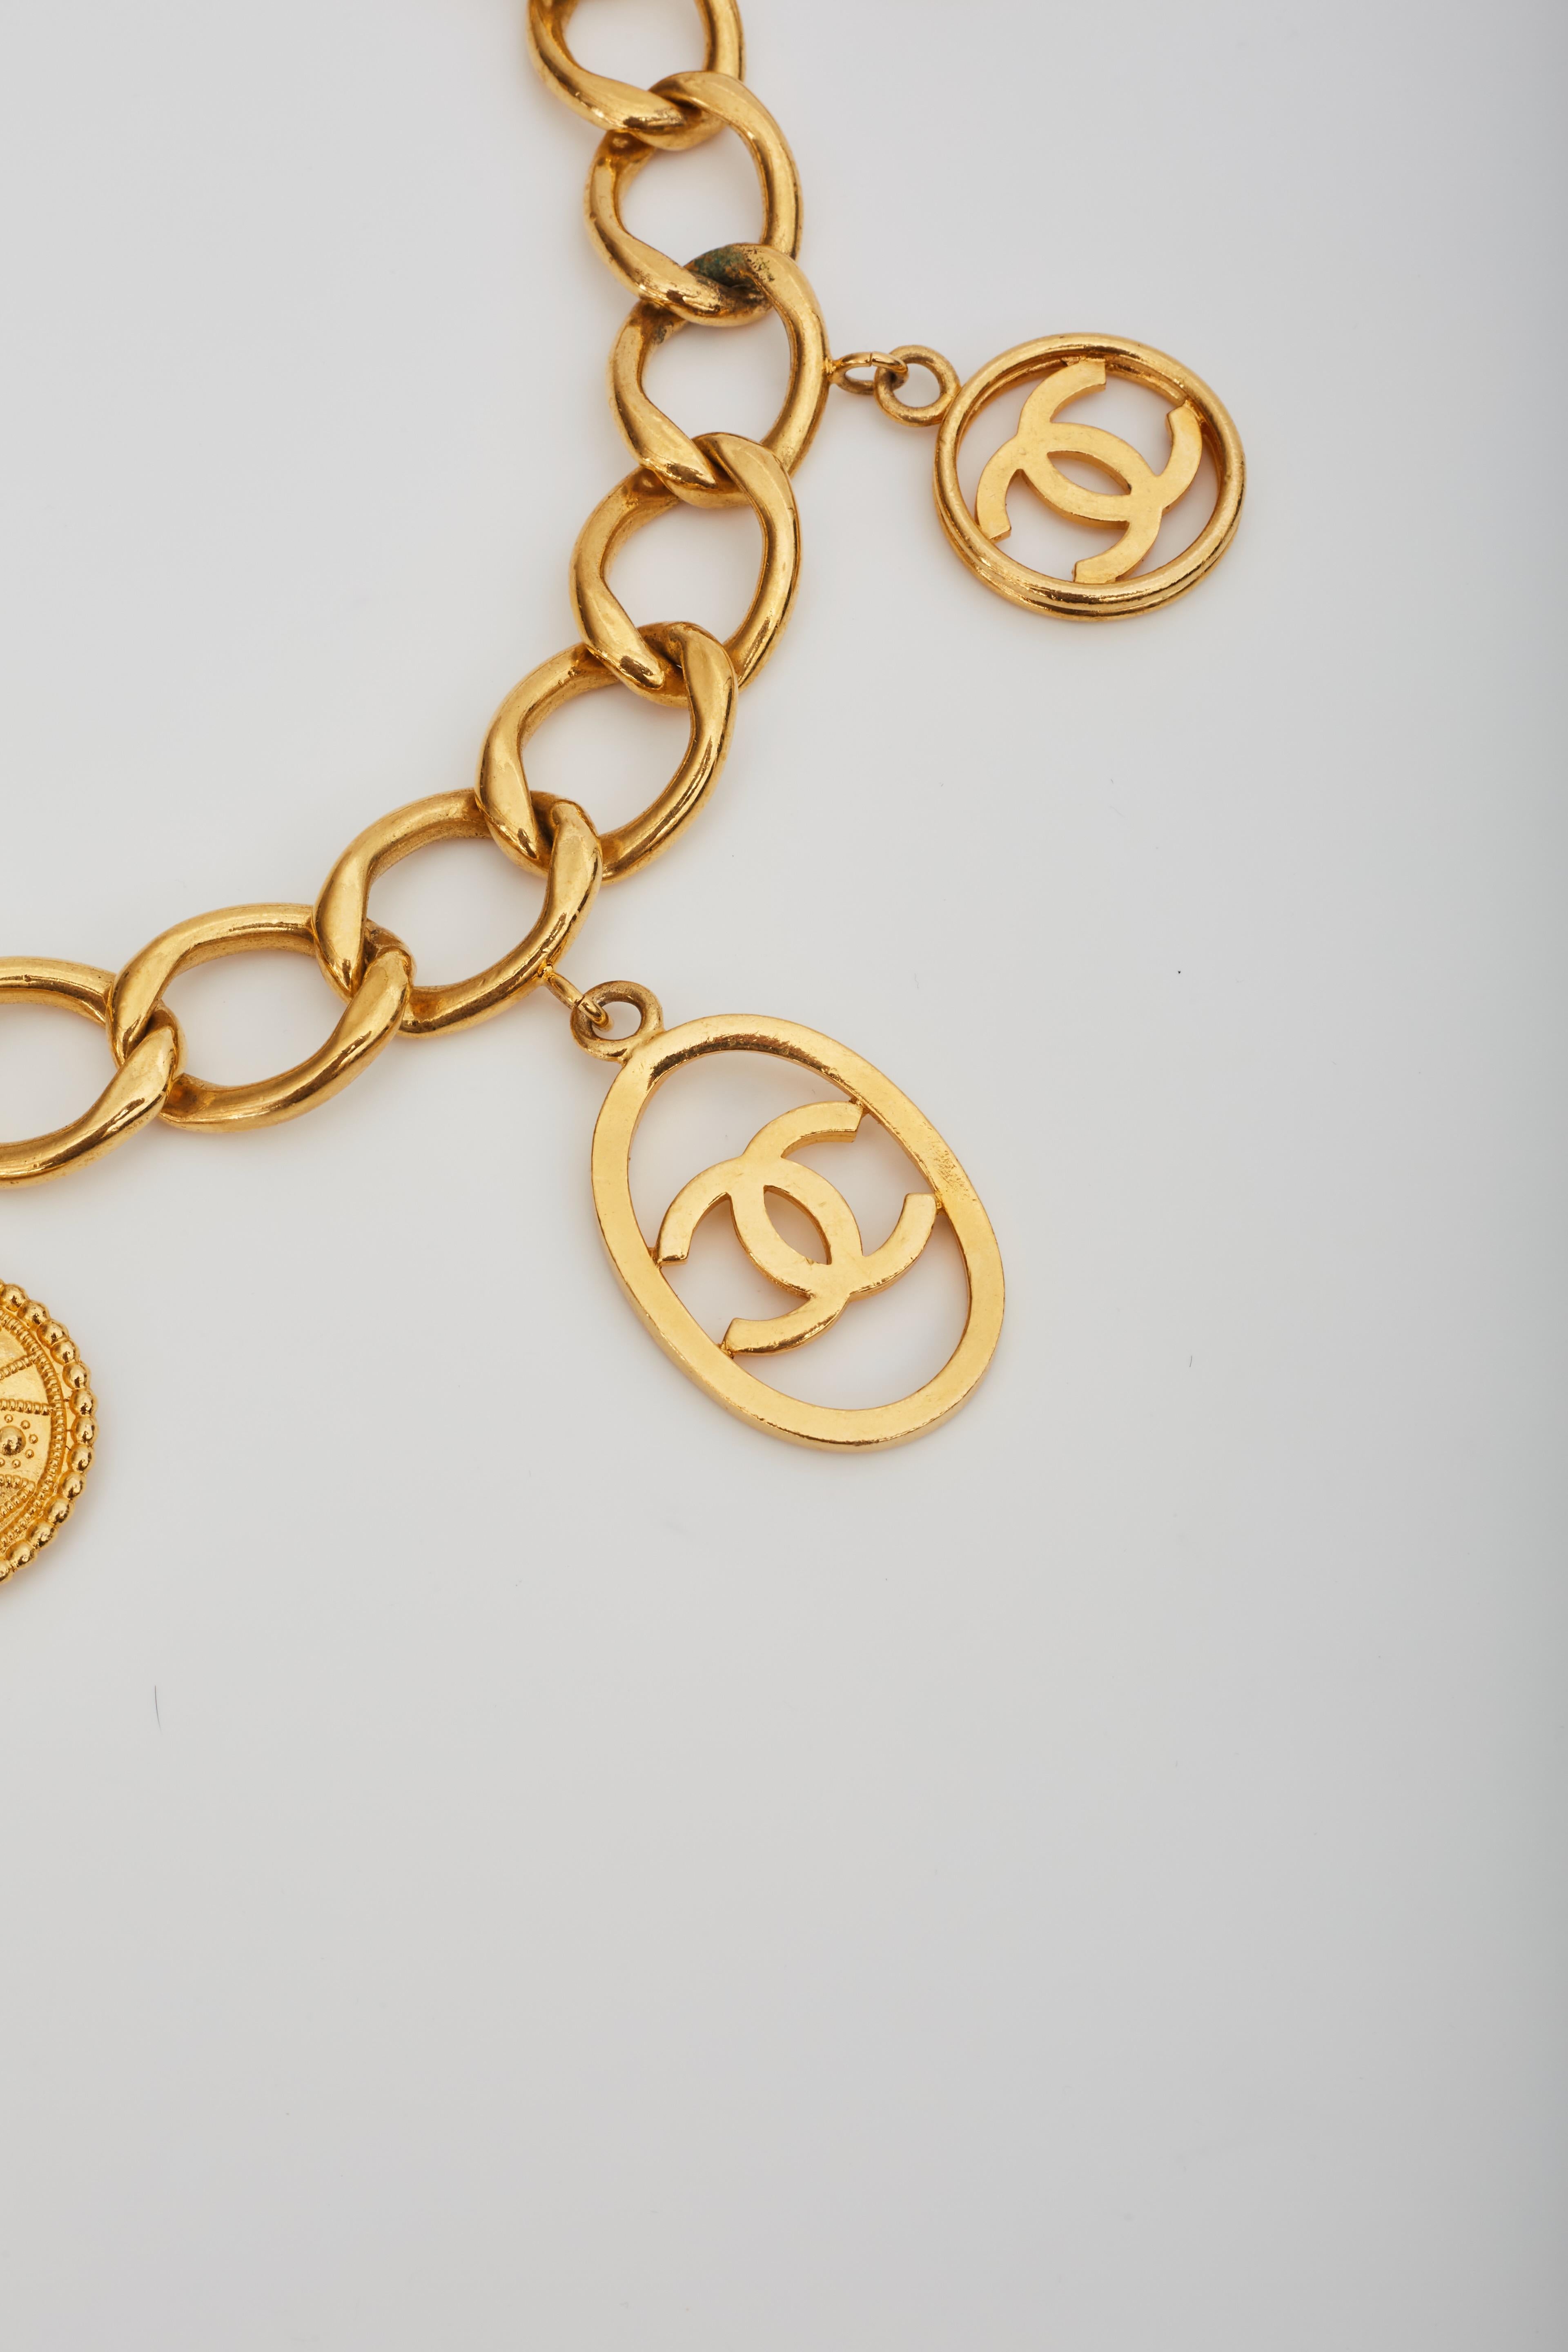 Chanel Logo Coin Medallion Charm Gold Chain Necklace Belt (1993) 26inch 3